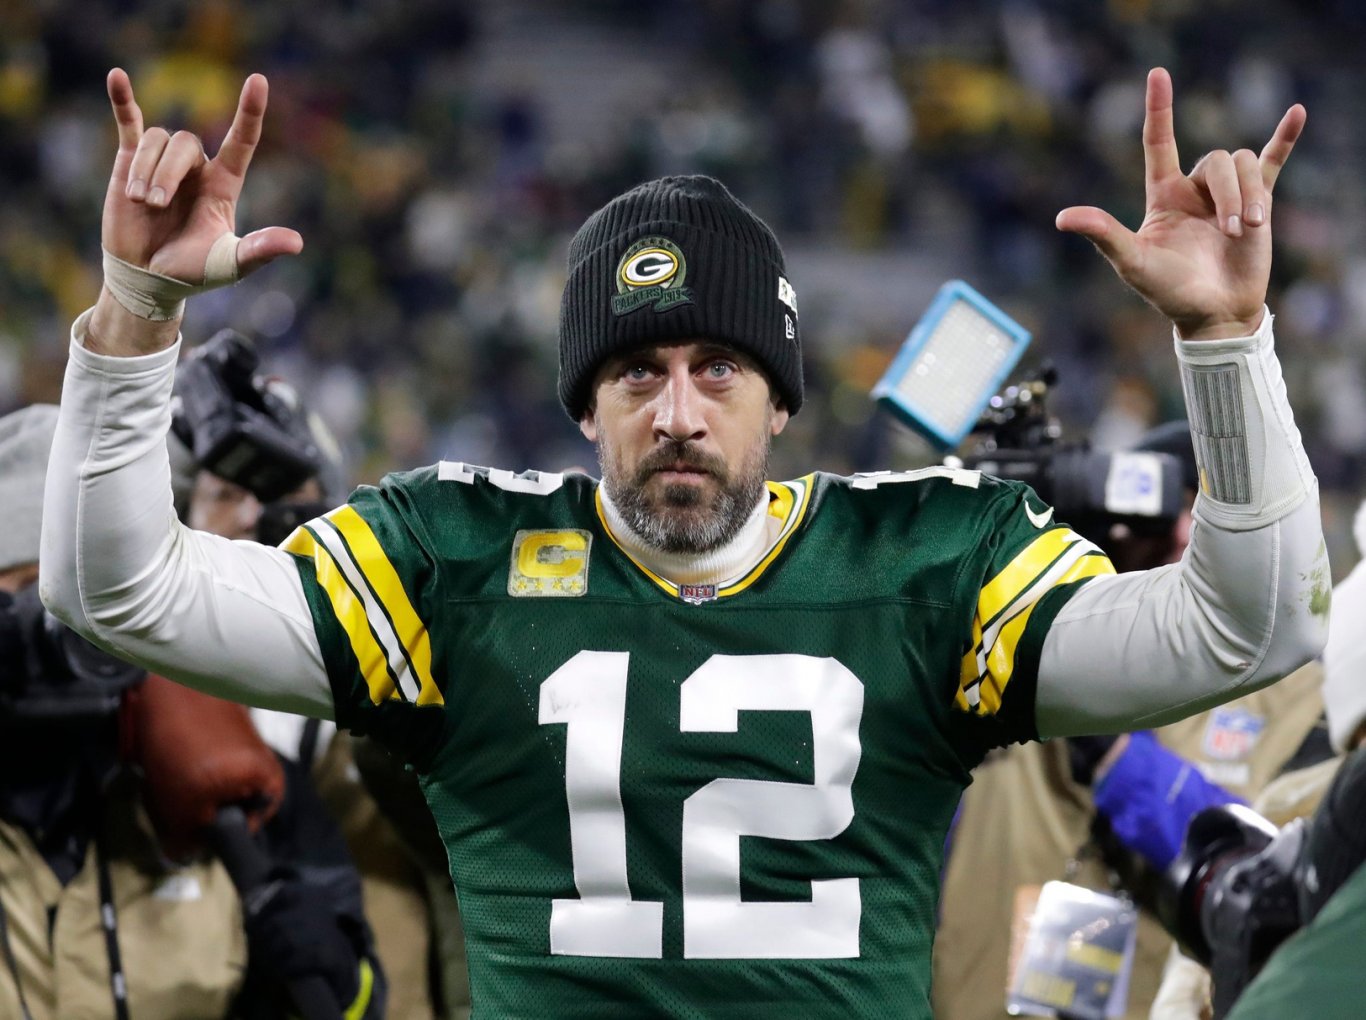 Minus Three - Aaron Nagler on Packers vs Jets trade leverage, can Aaron  Rodgers succeed at 40 years old & are the Packers confident in Jordan Love?